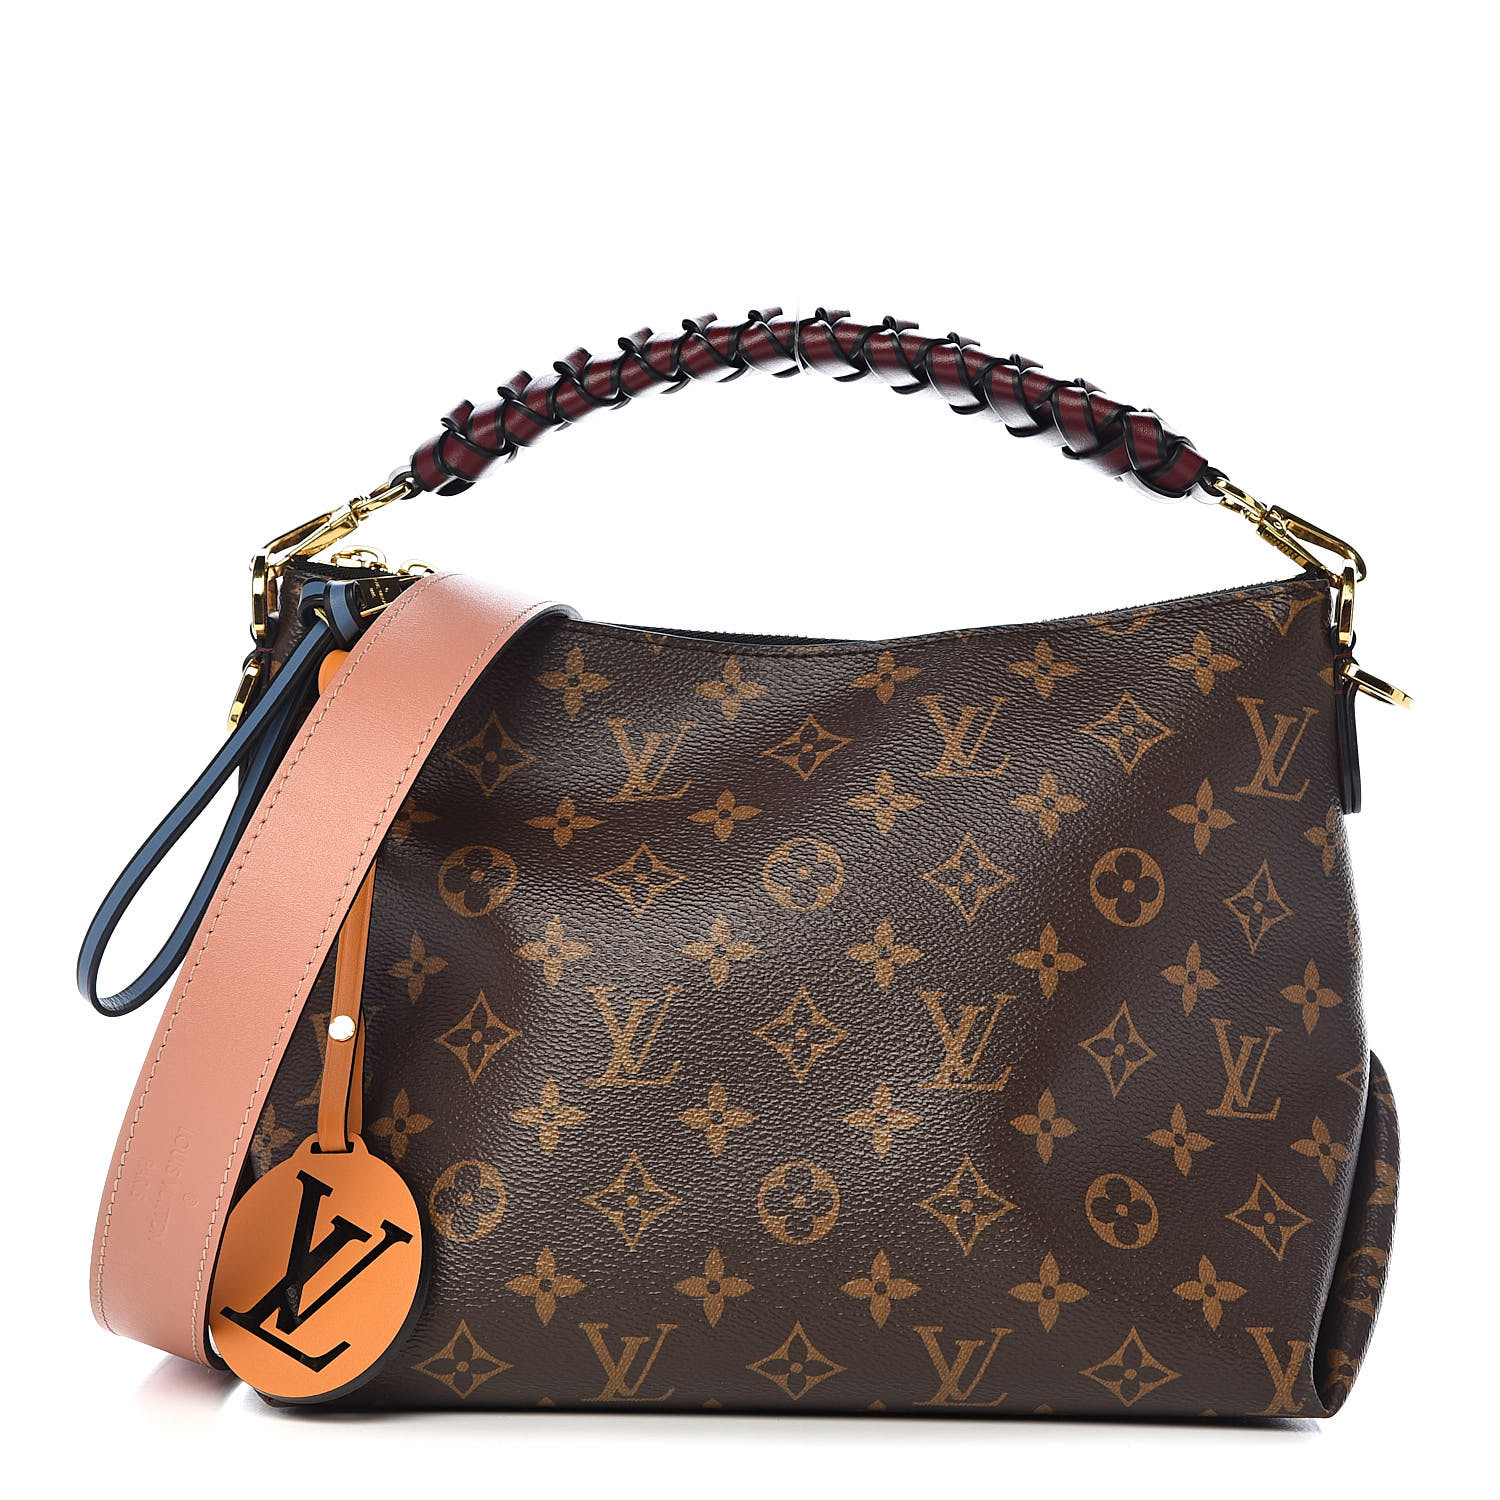 BEAUBOURG HOBO MM M56084 – Outlet Store Louis Vuitton